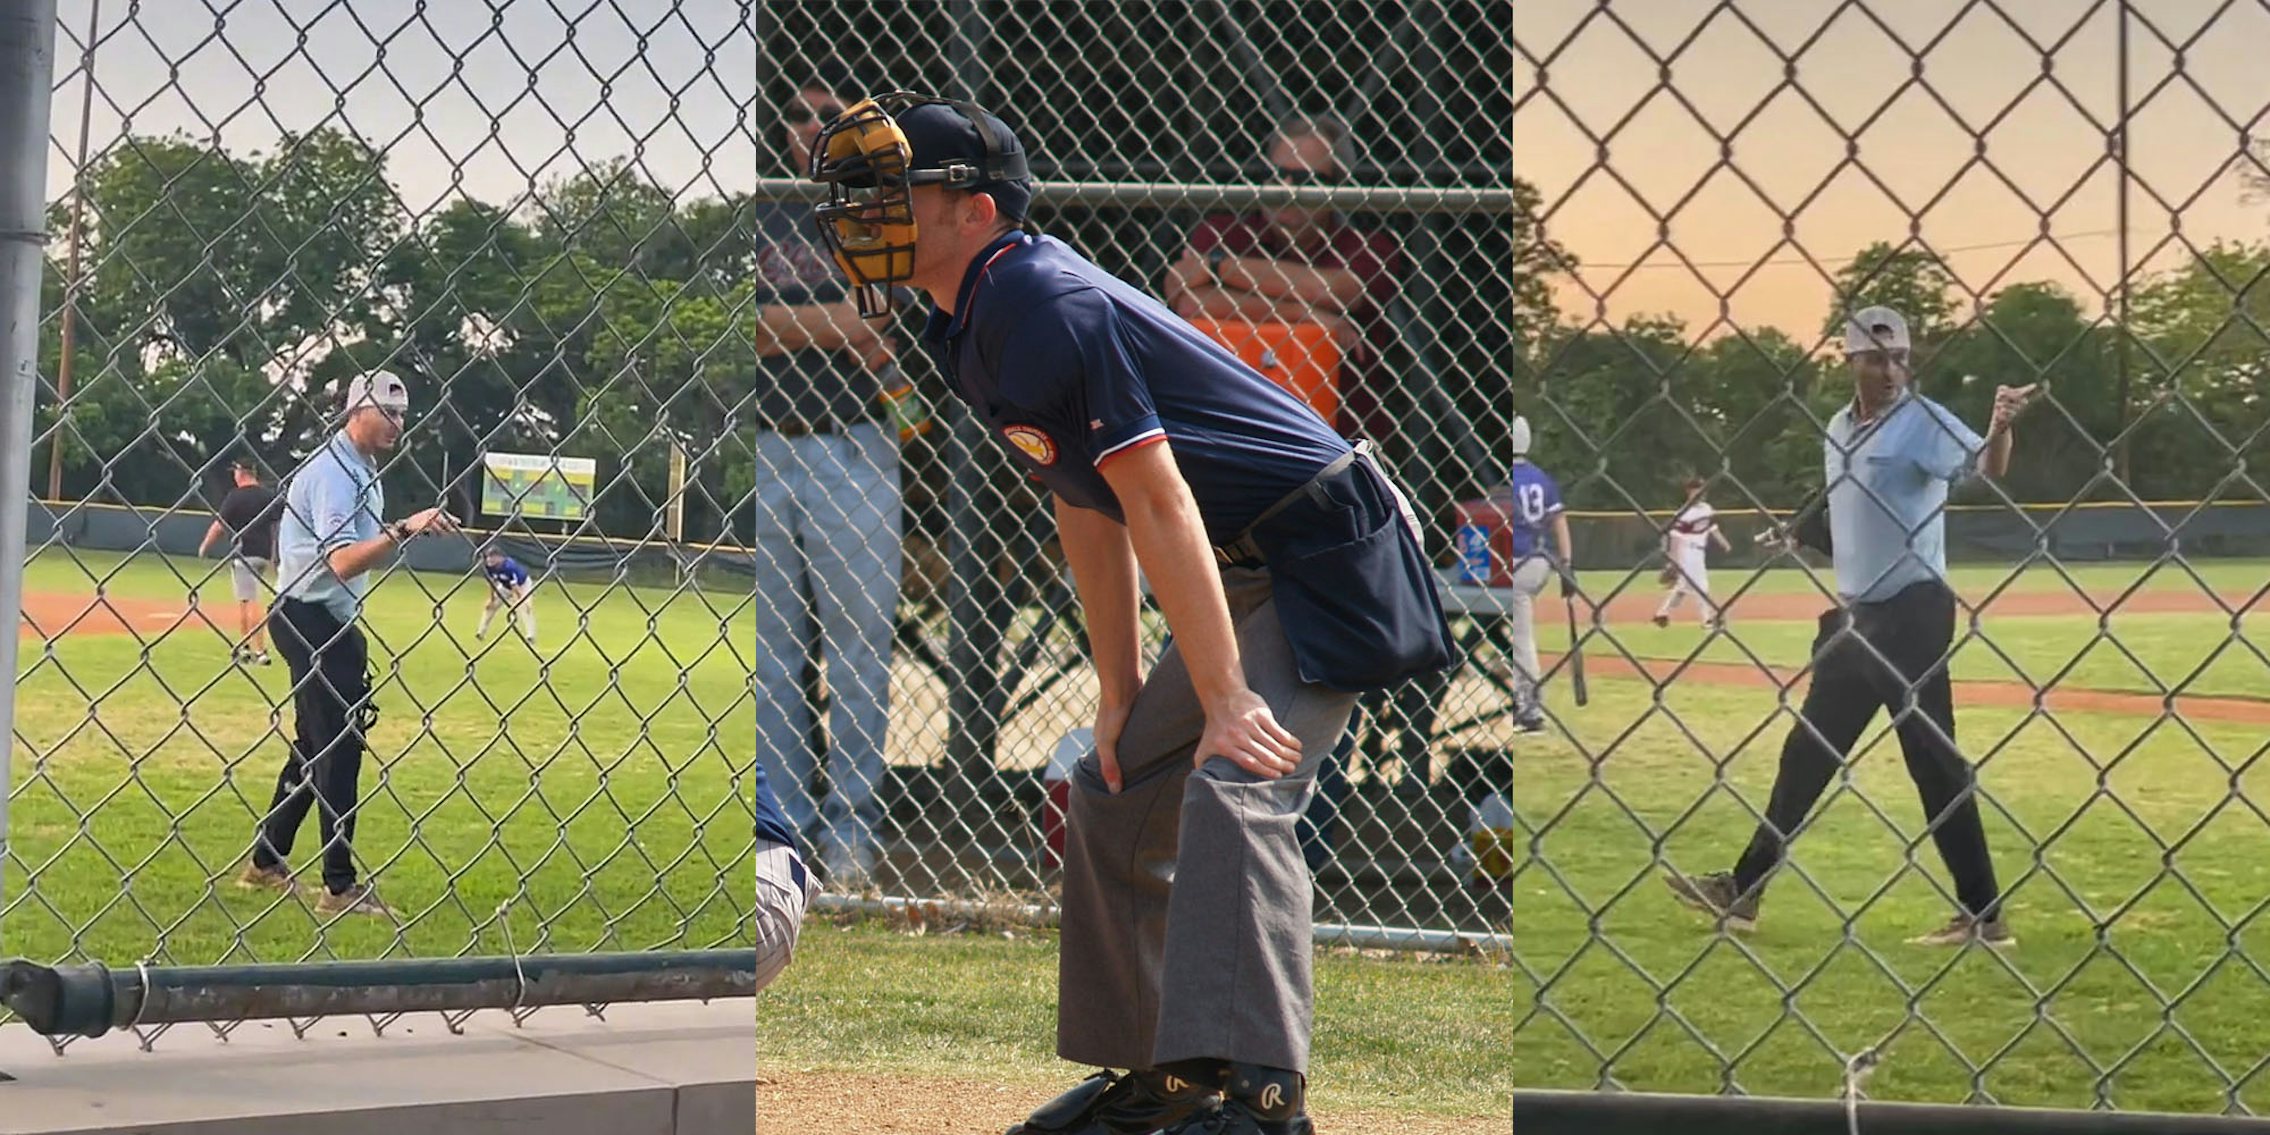 Little league umpire on field pointing hand shouting (l) Little league umpire positioned on field (c) Little league umpire pointing finger walking back to field (r)